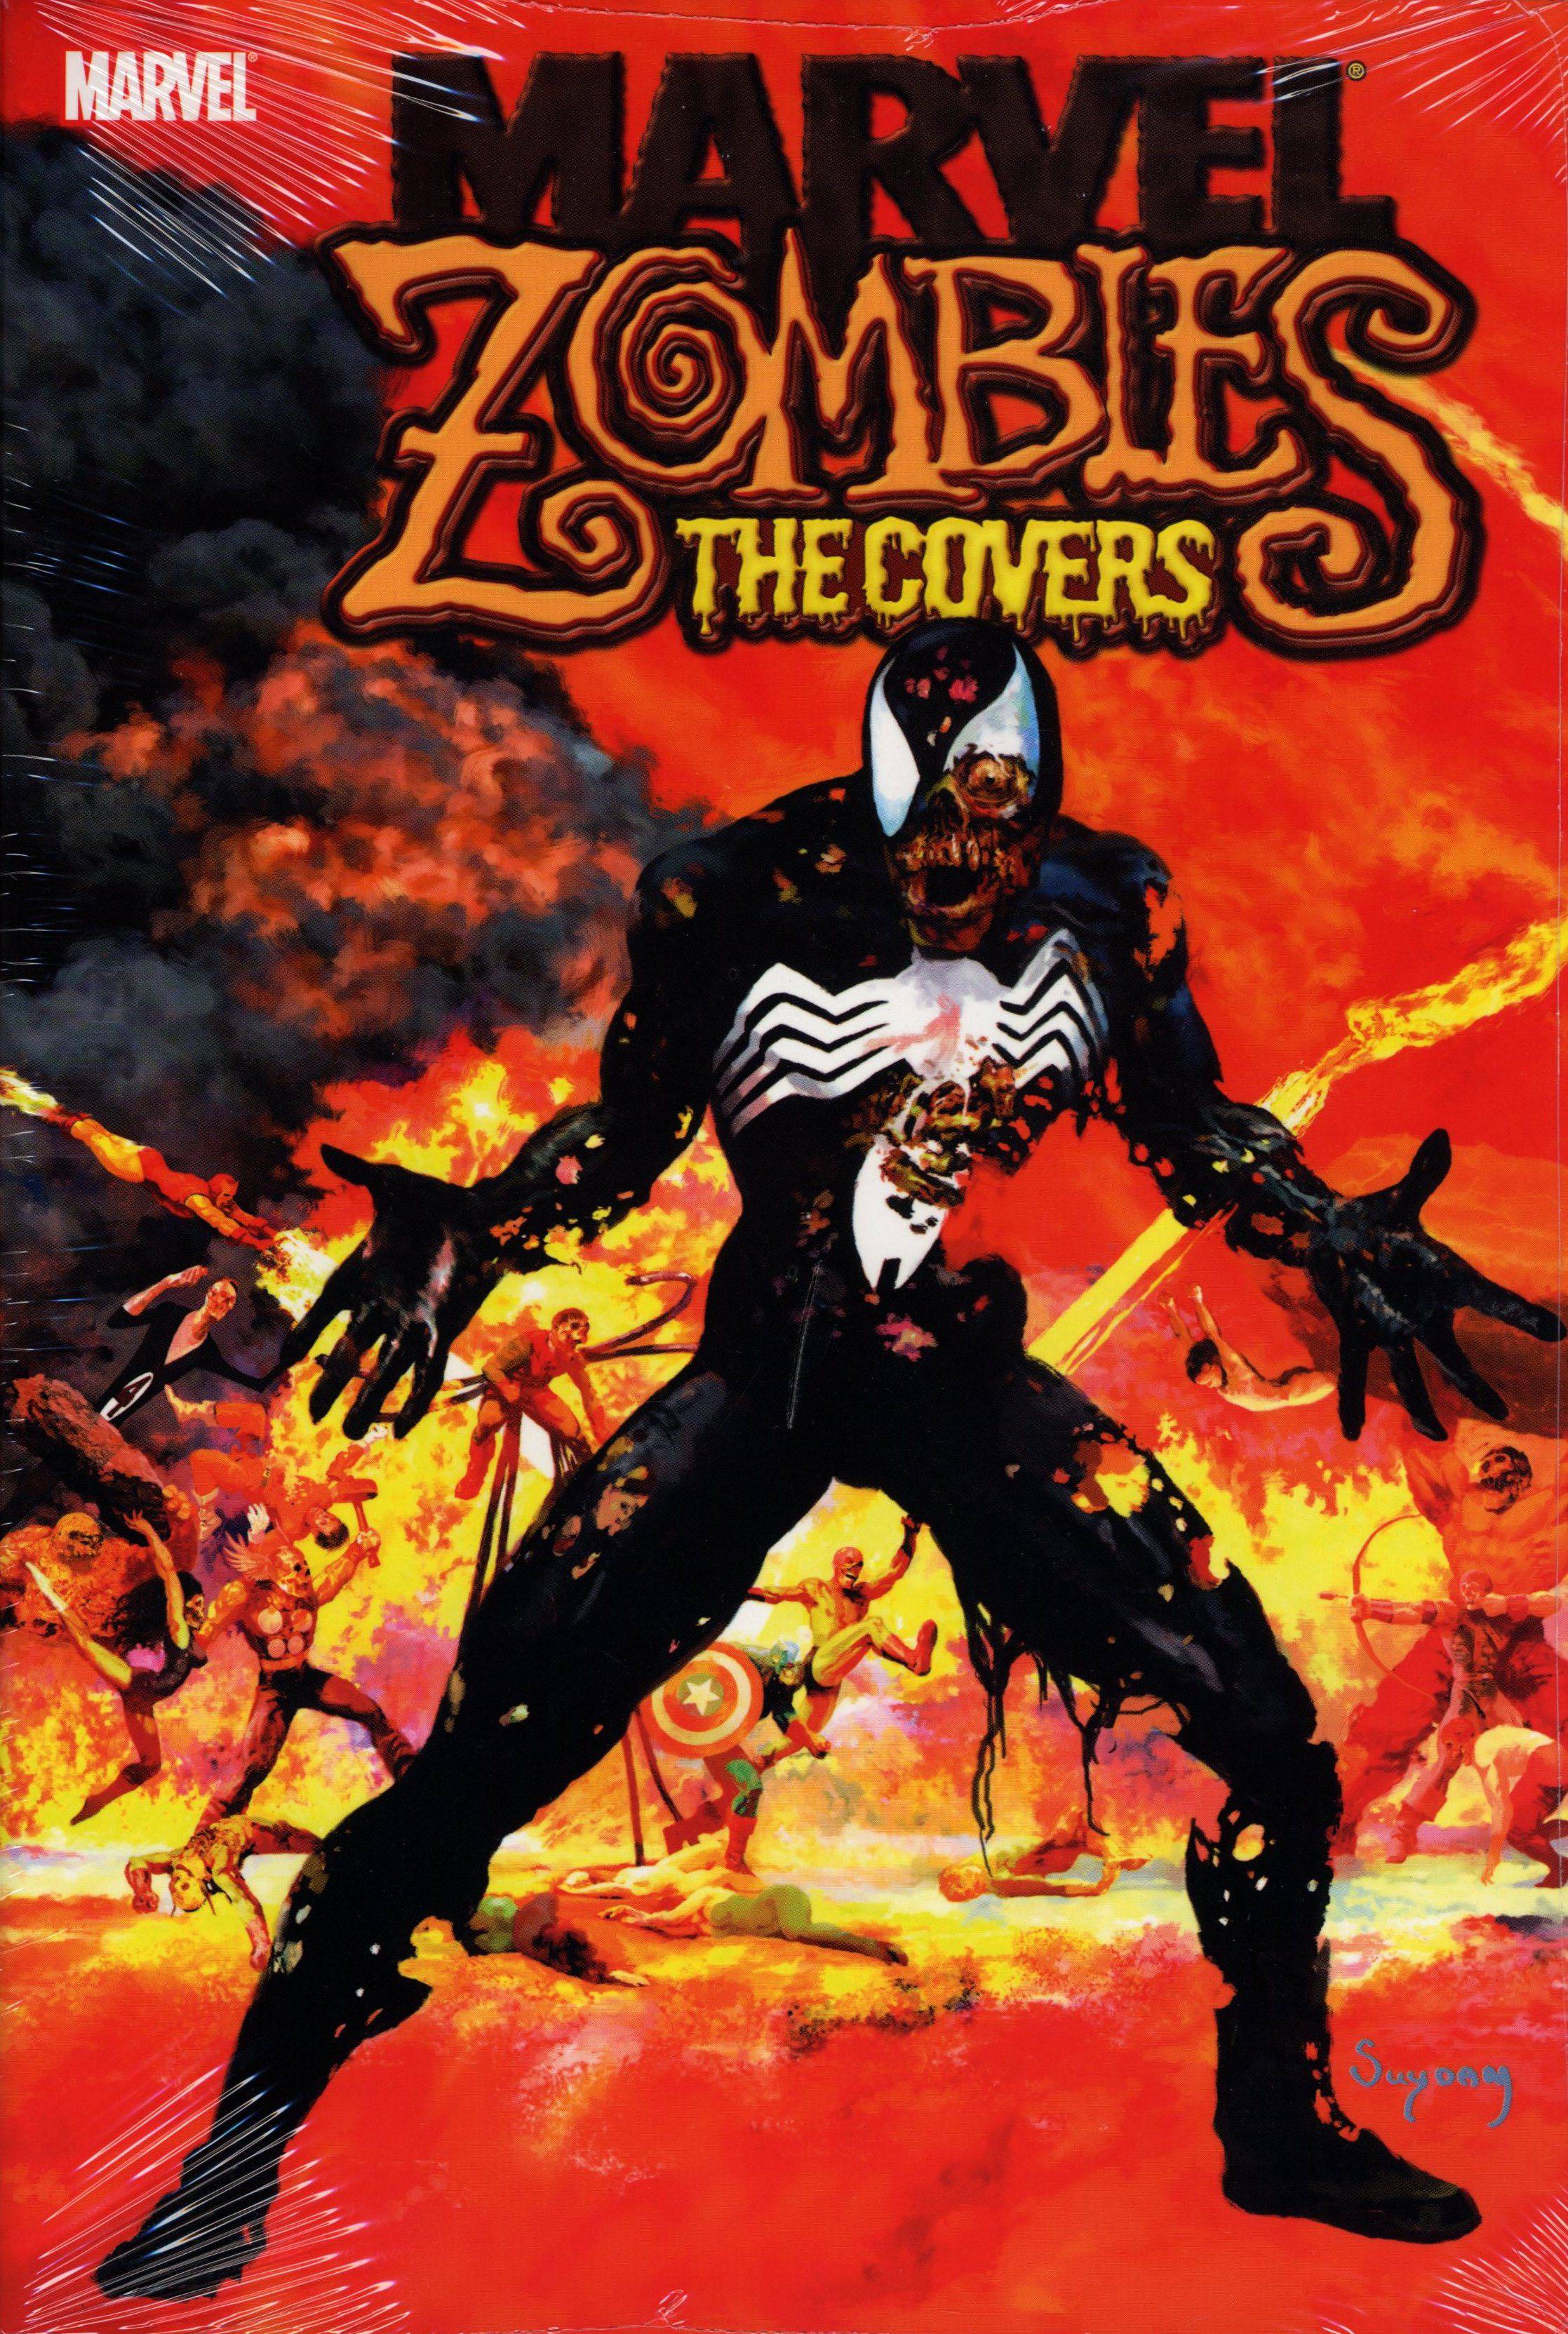 Marvel Zombies Covers HC - State of Comics